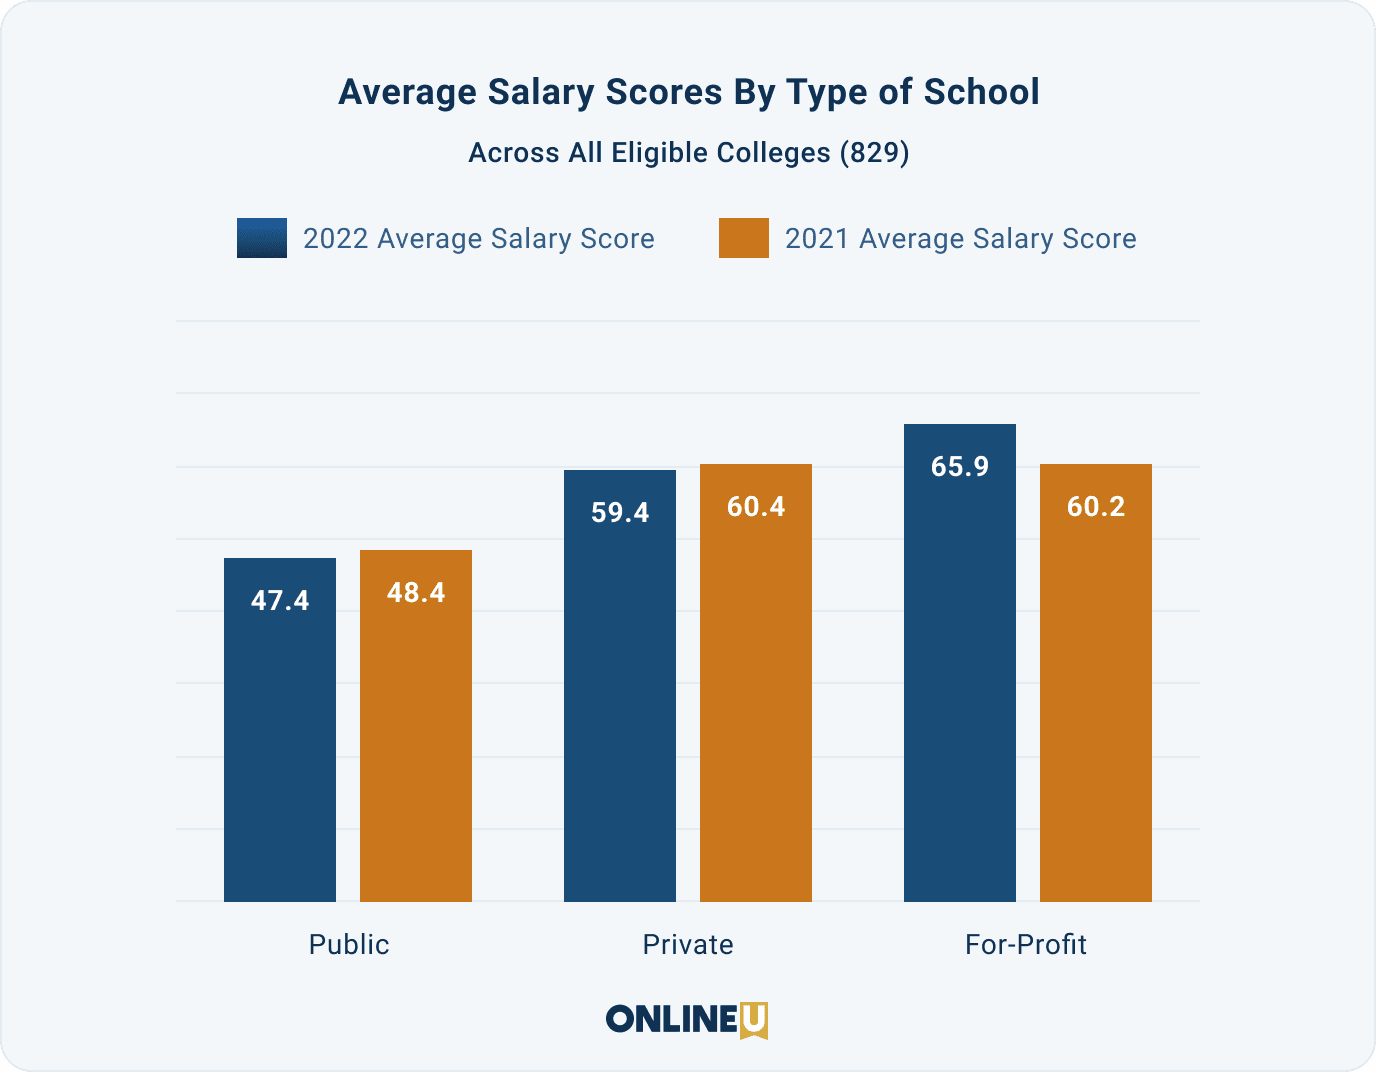 Bar graph showing average Salary Scores for public, private, and for-profit schools